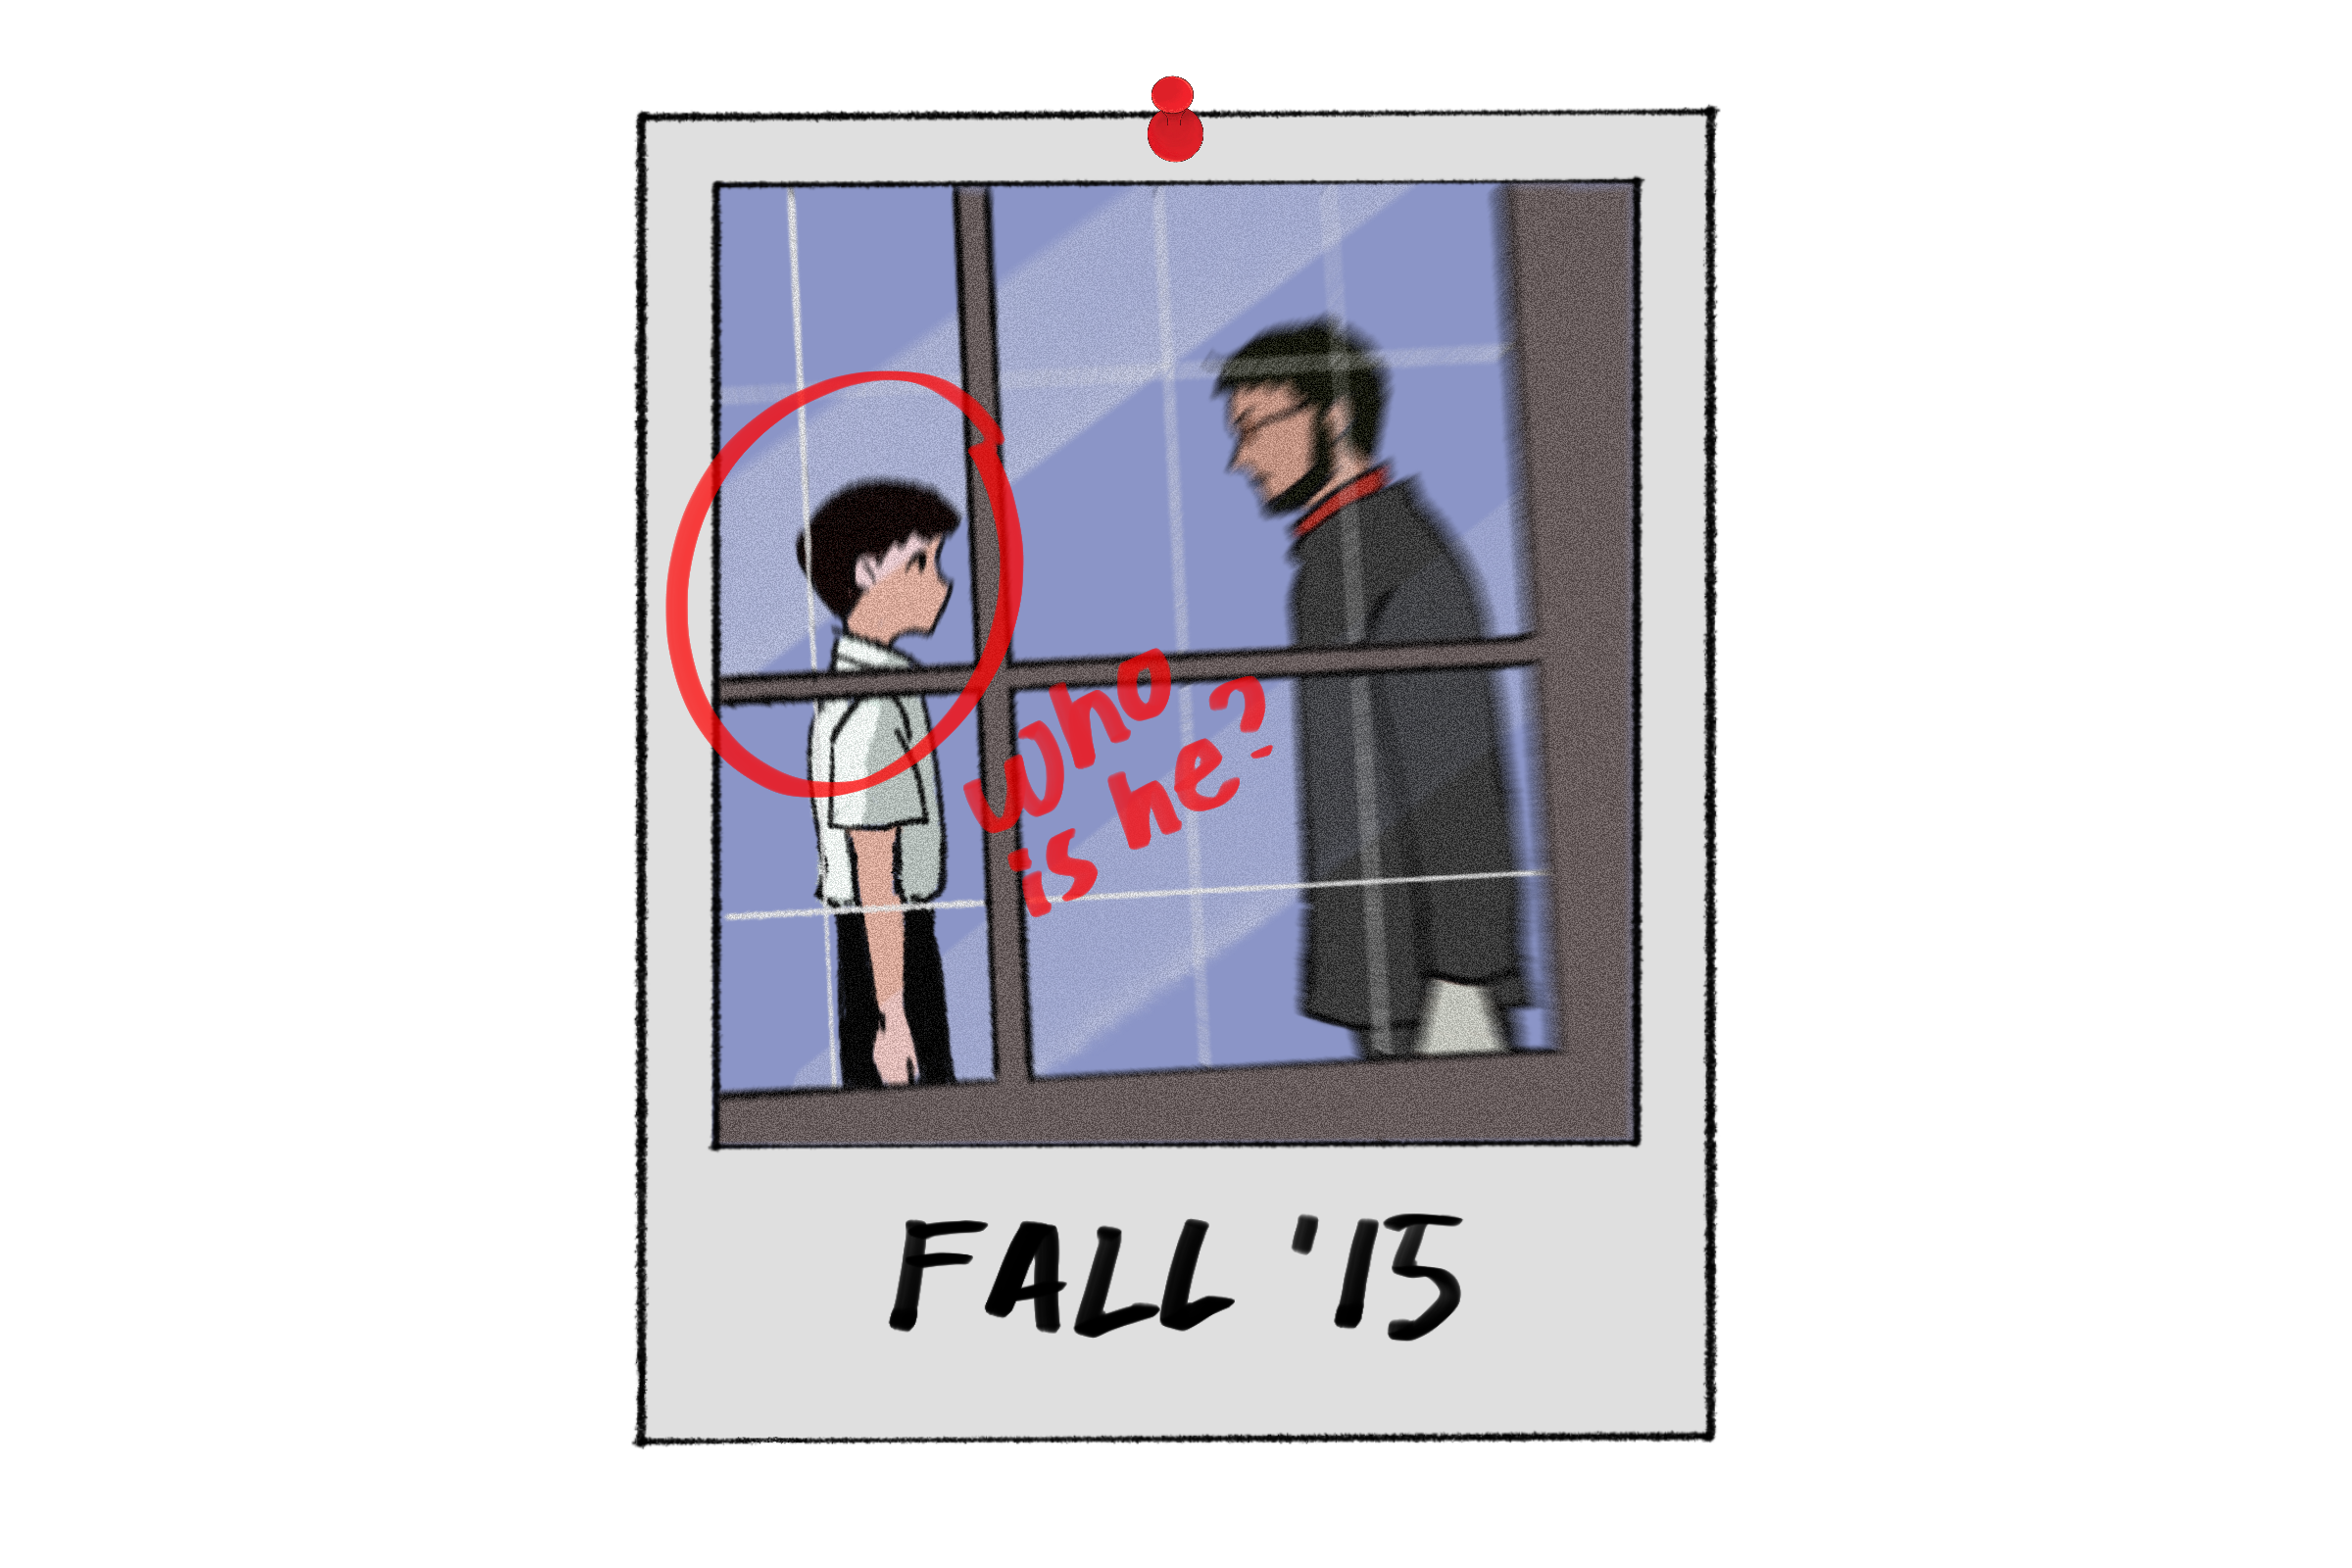 digital illustration of a polaroid featuring a blurry photo of Shinji Ikari and Gendoh Ikari talking to each other behind a window; Shinji is circled with red sharpie and labelled “who is he?” with a caption reading “Fall ’15" at the bottom of the polaroid